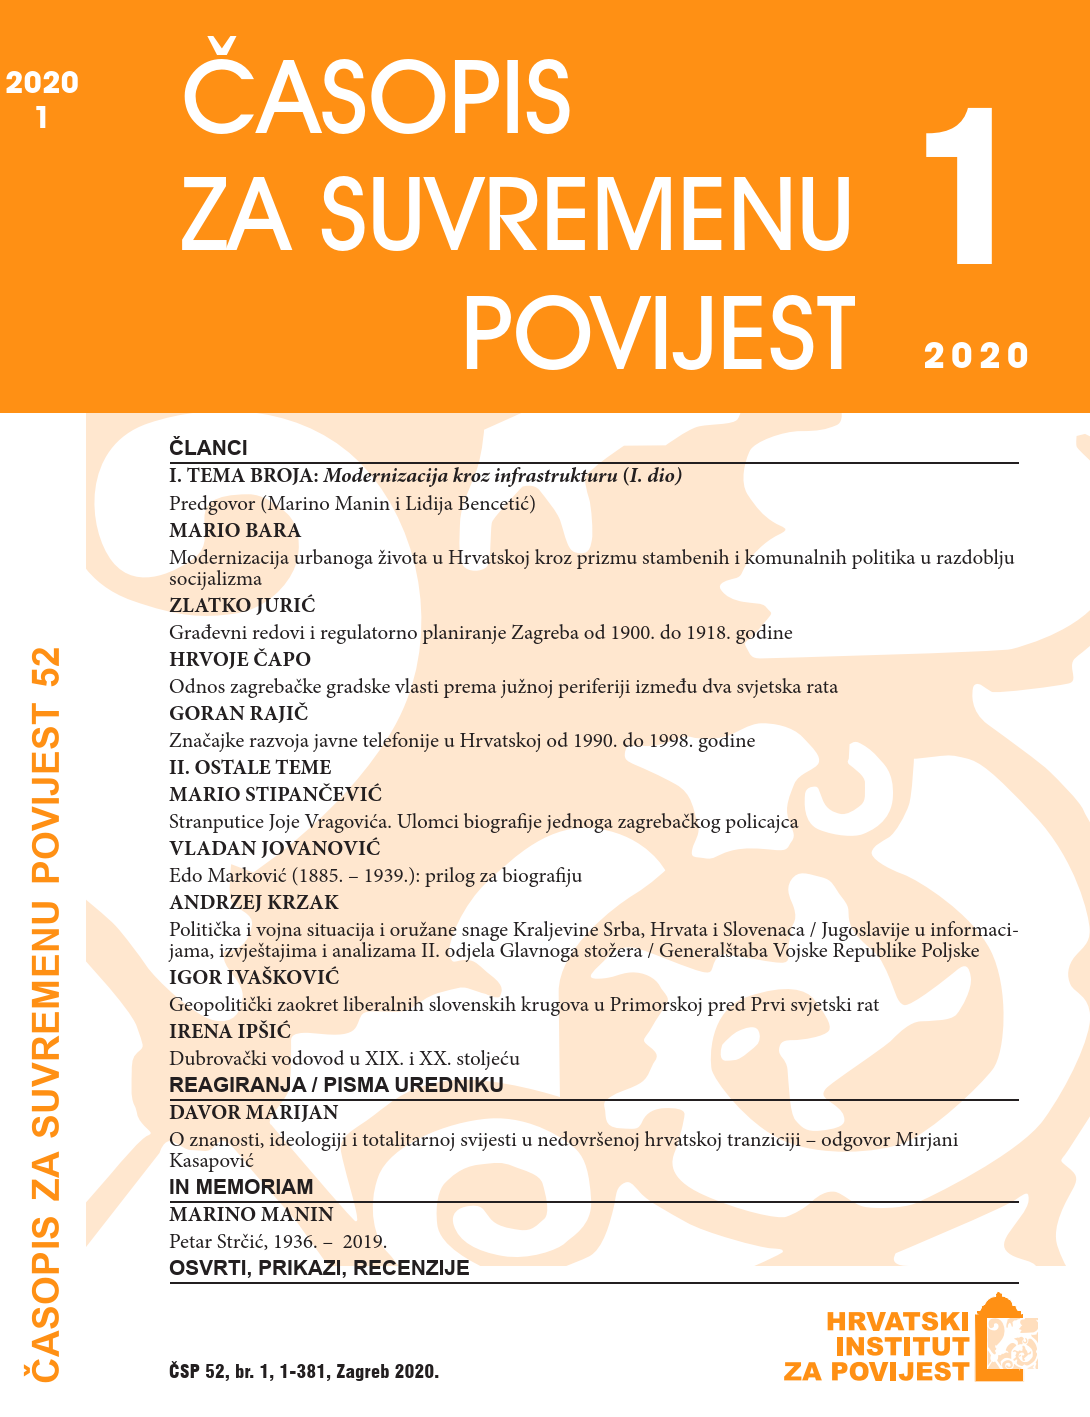 Modernization Processes in Croatia’s Urban Living through the Prism of Housing and Communal Policies during the Era of Socialism Cover Image